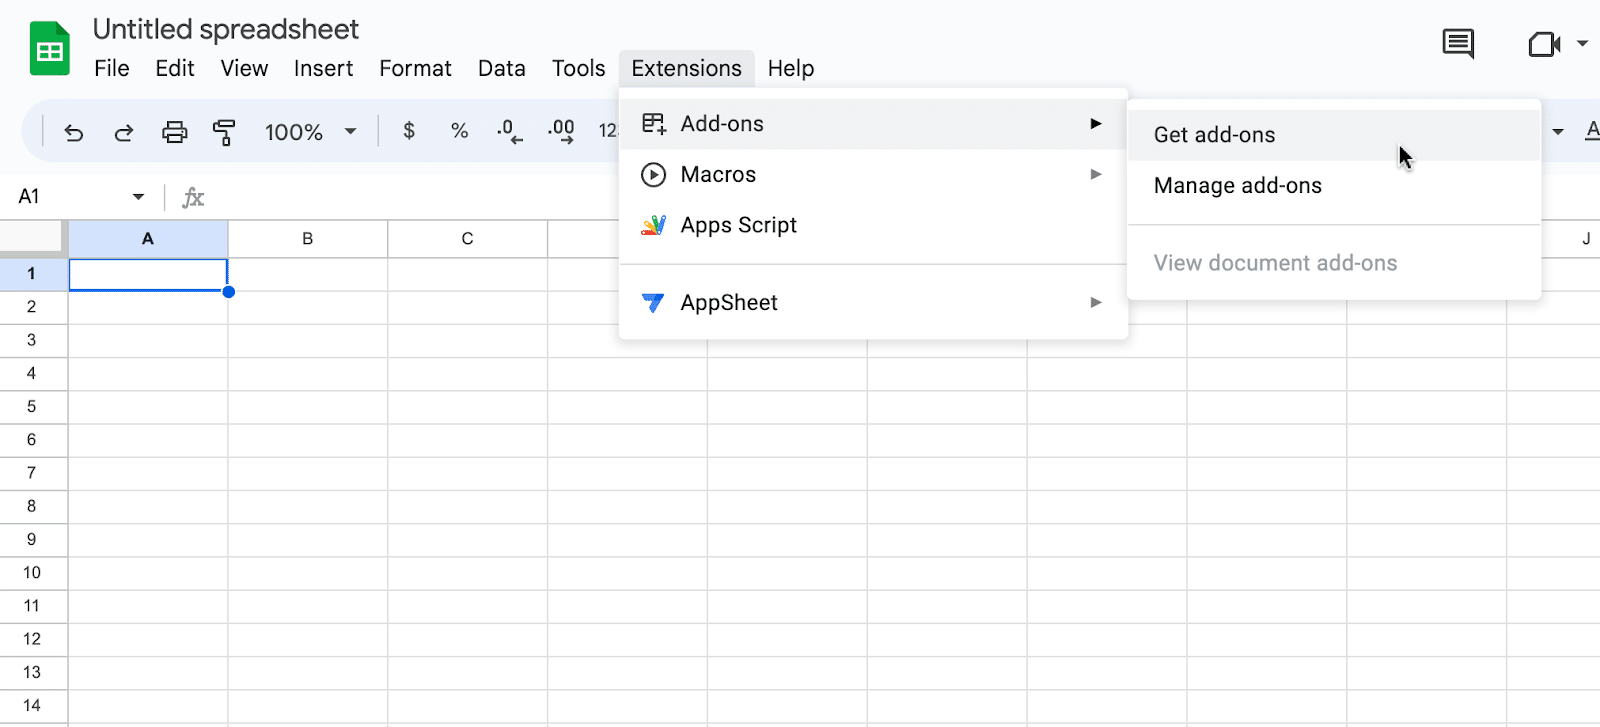 Accessing Google Workspace Marketplace through Get add-ons in Google Sheets